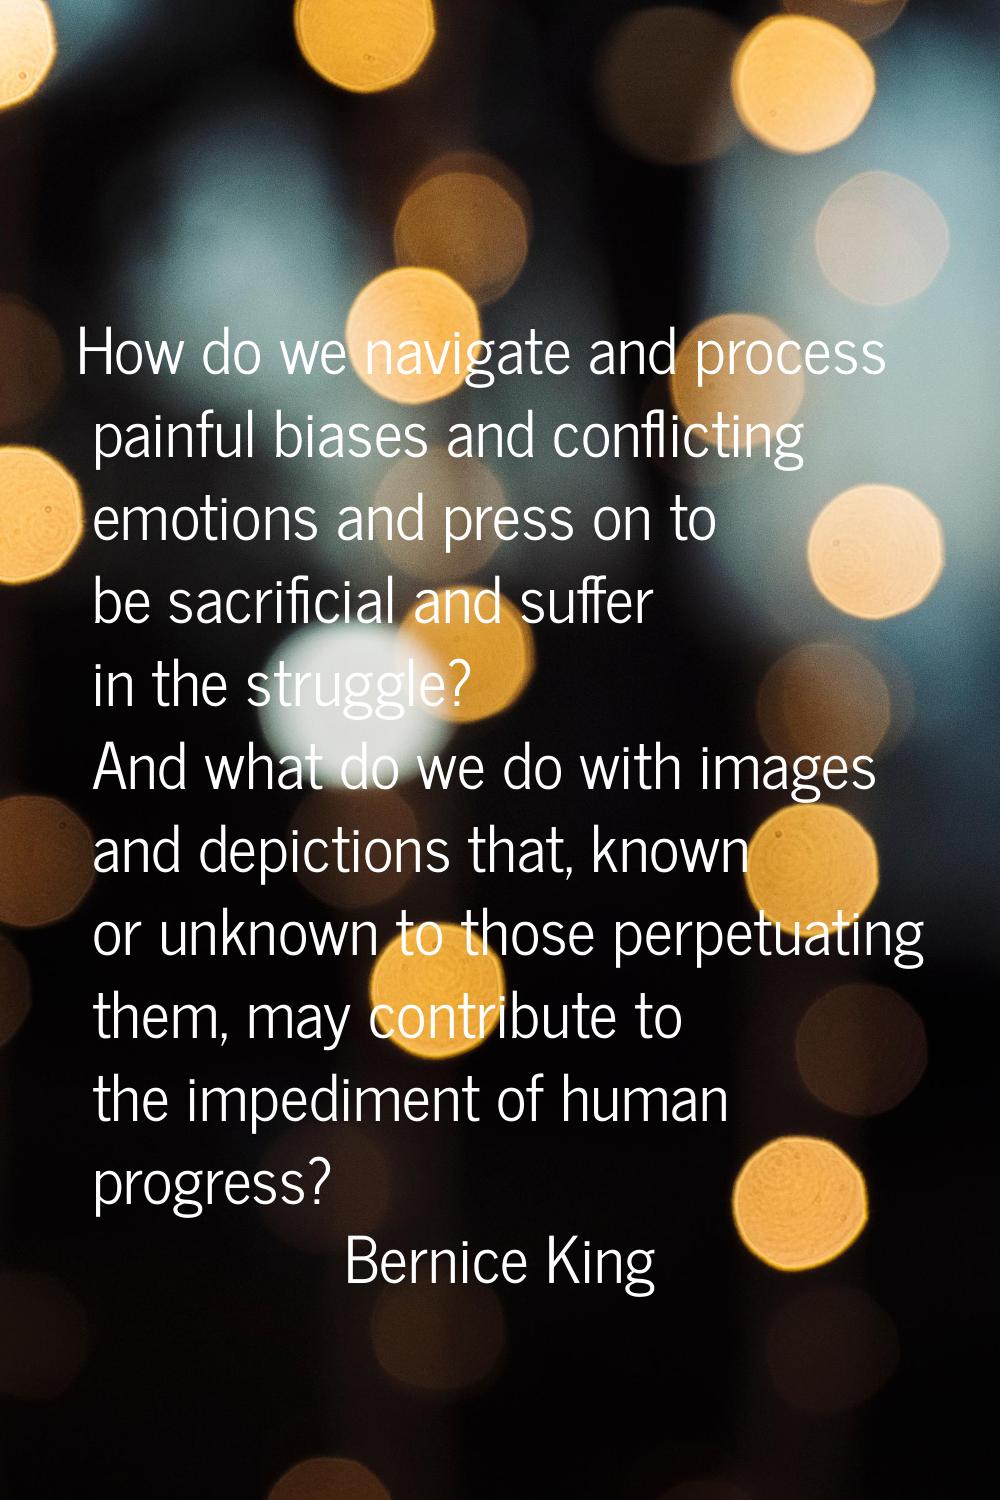 How do we navigate and process painful biases and conflicting emotions and press on to be sacrifici